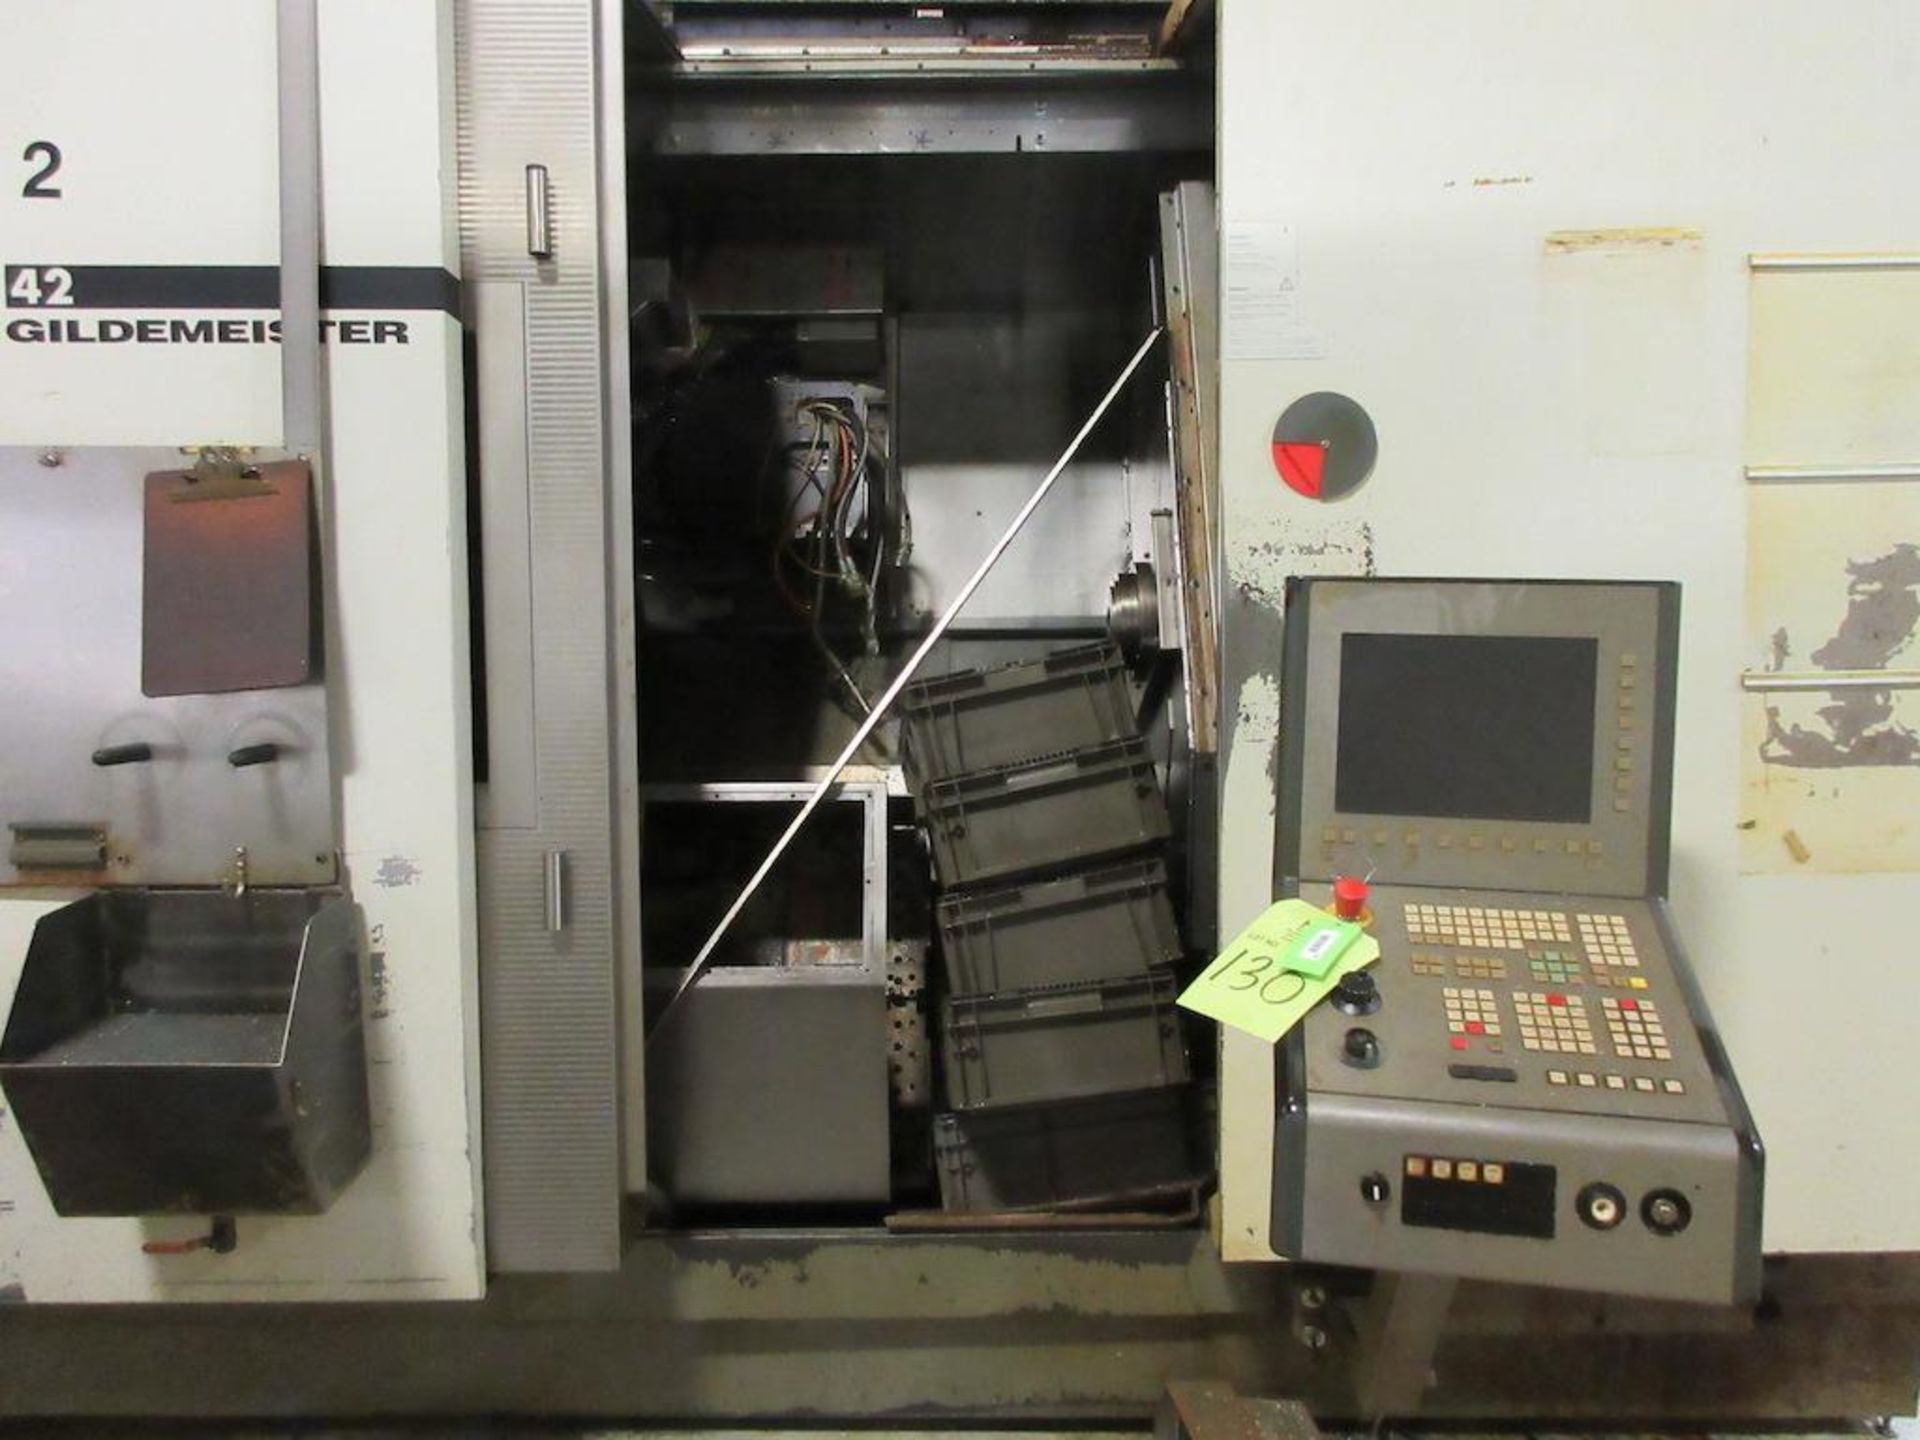 2006 DMG CNC Lathe, Model Twin 42, Twin Spindle, 4 Axis, with CNC Control, B-Axis, Swing Diameter - Image 2 of 15